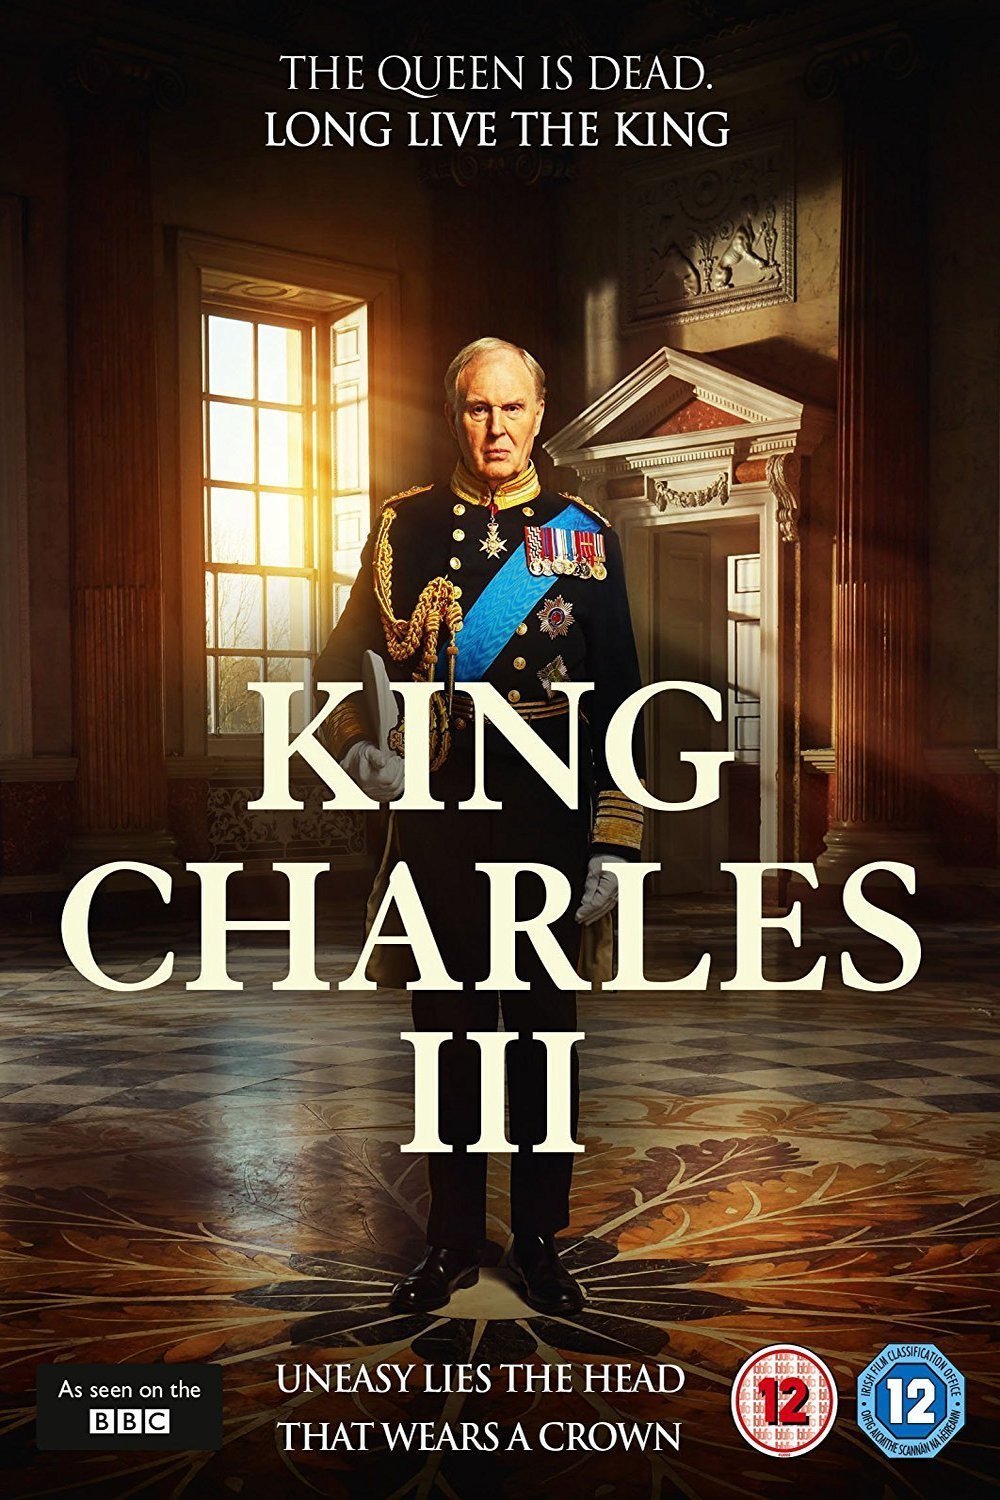 Poster of the movie King Charles III